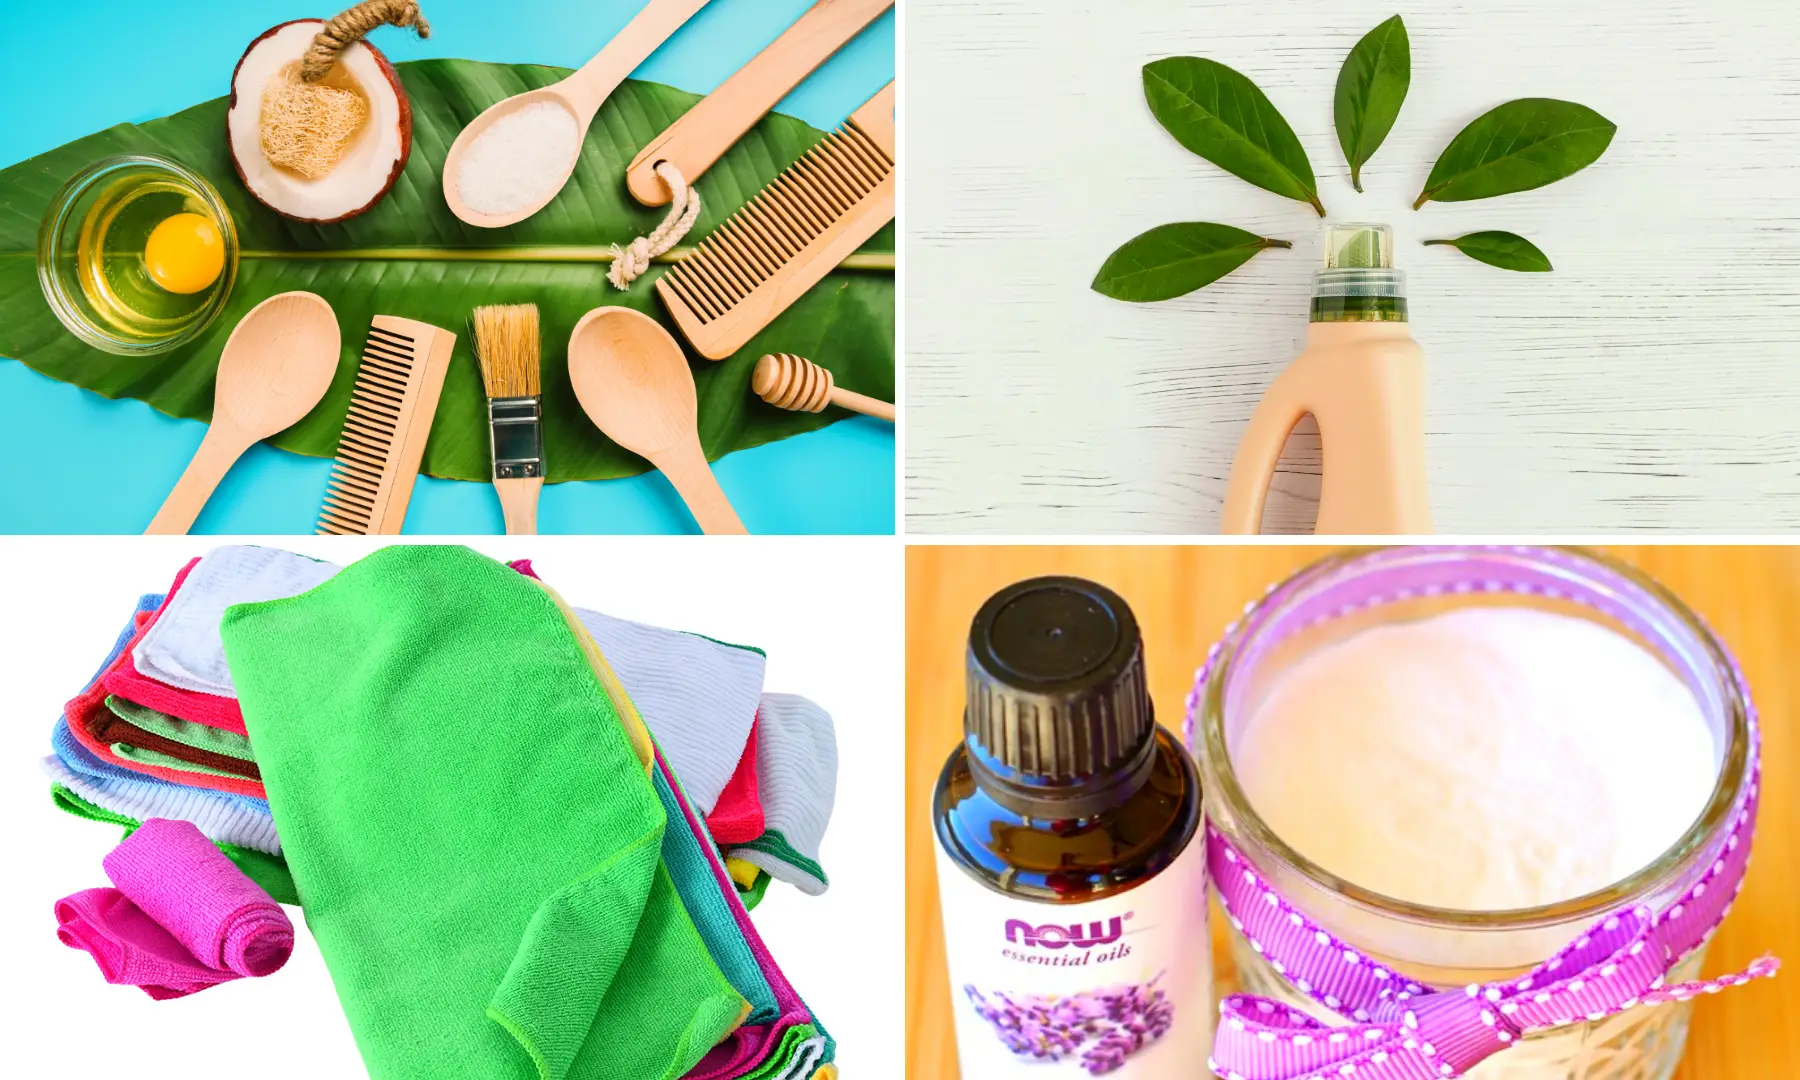 9 Simple Ways to Go Green with Your Cleaning Routine